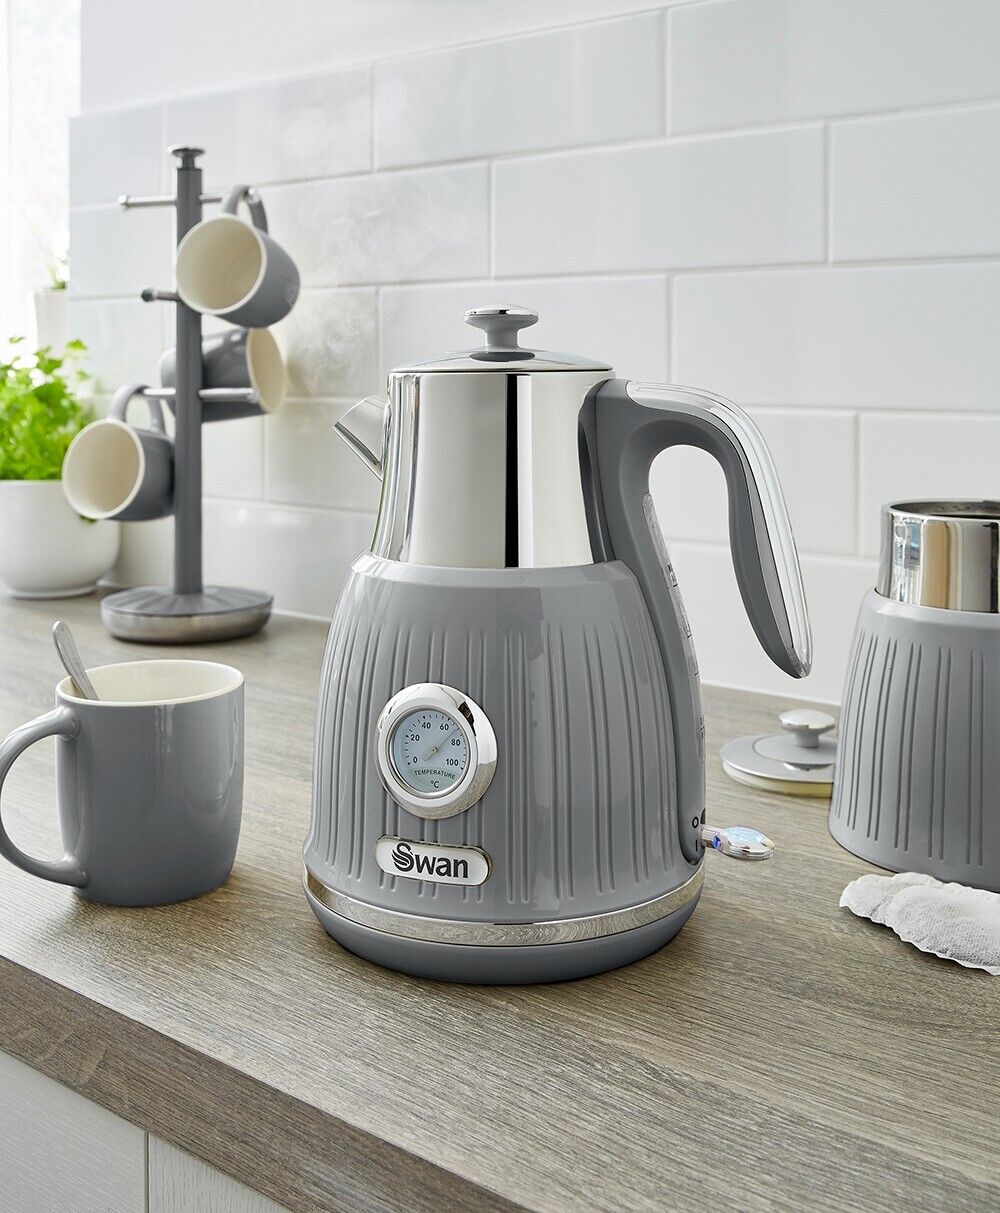 SWAN Retro Grey 1.5L 3KW Dial Kettle 4 Slice Toaster, Canisters, Mug Tree & Towel Pole Kitchen Set of 7